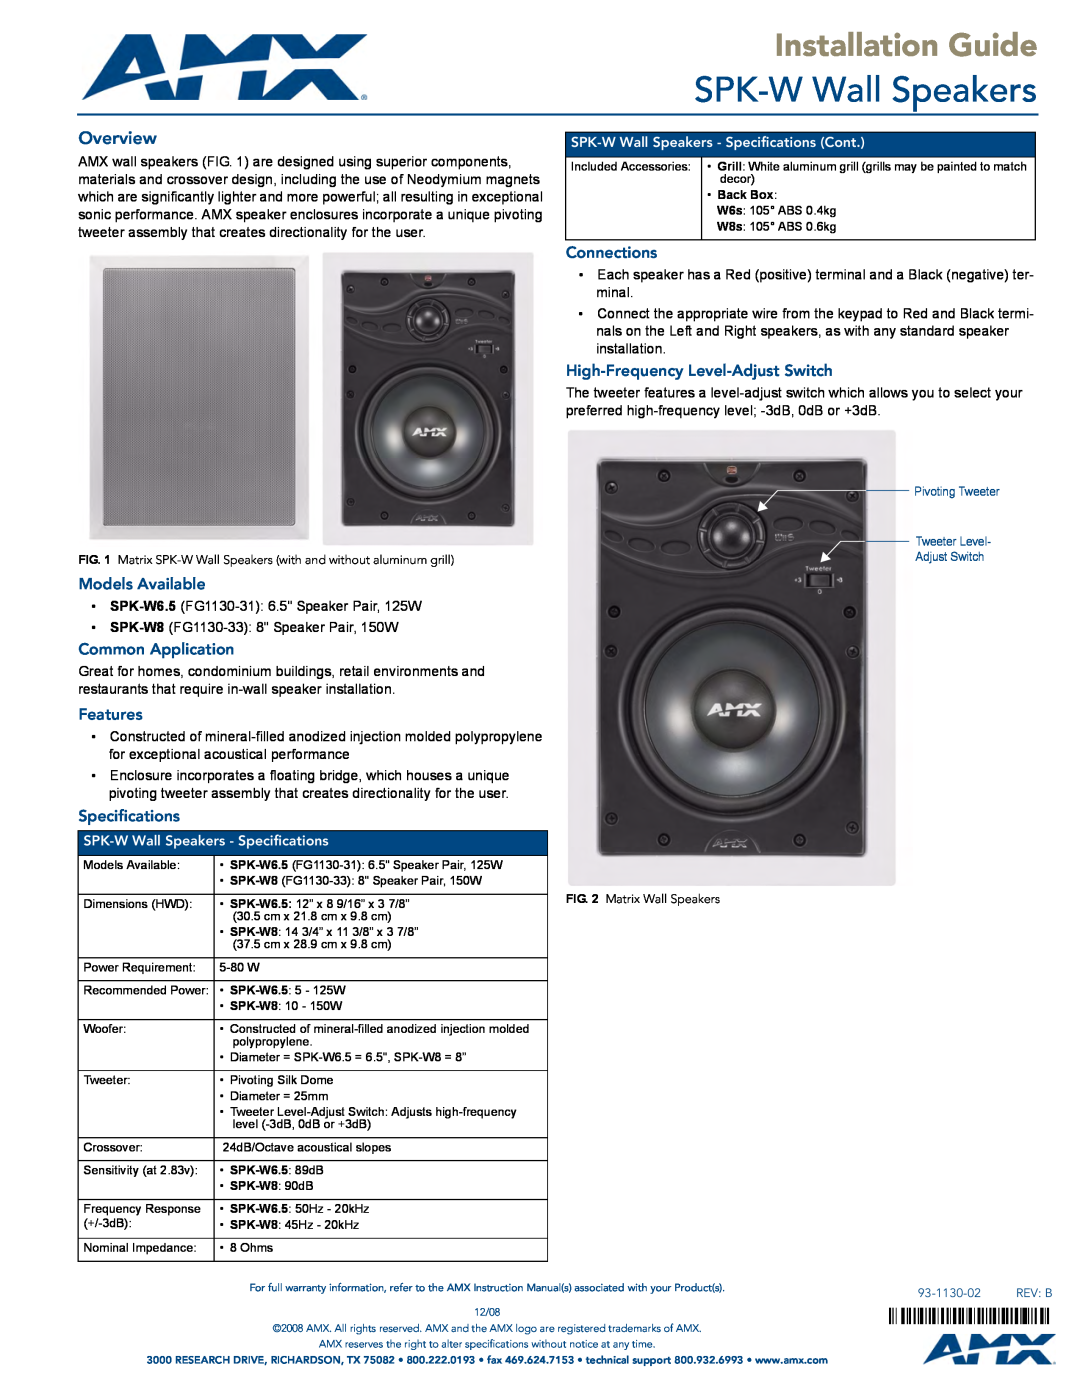 AMX specifications SPK-WWall Speakers, Installation Guide, Overview, Models Available, Common Application, Features 